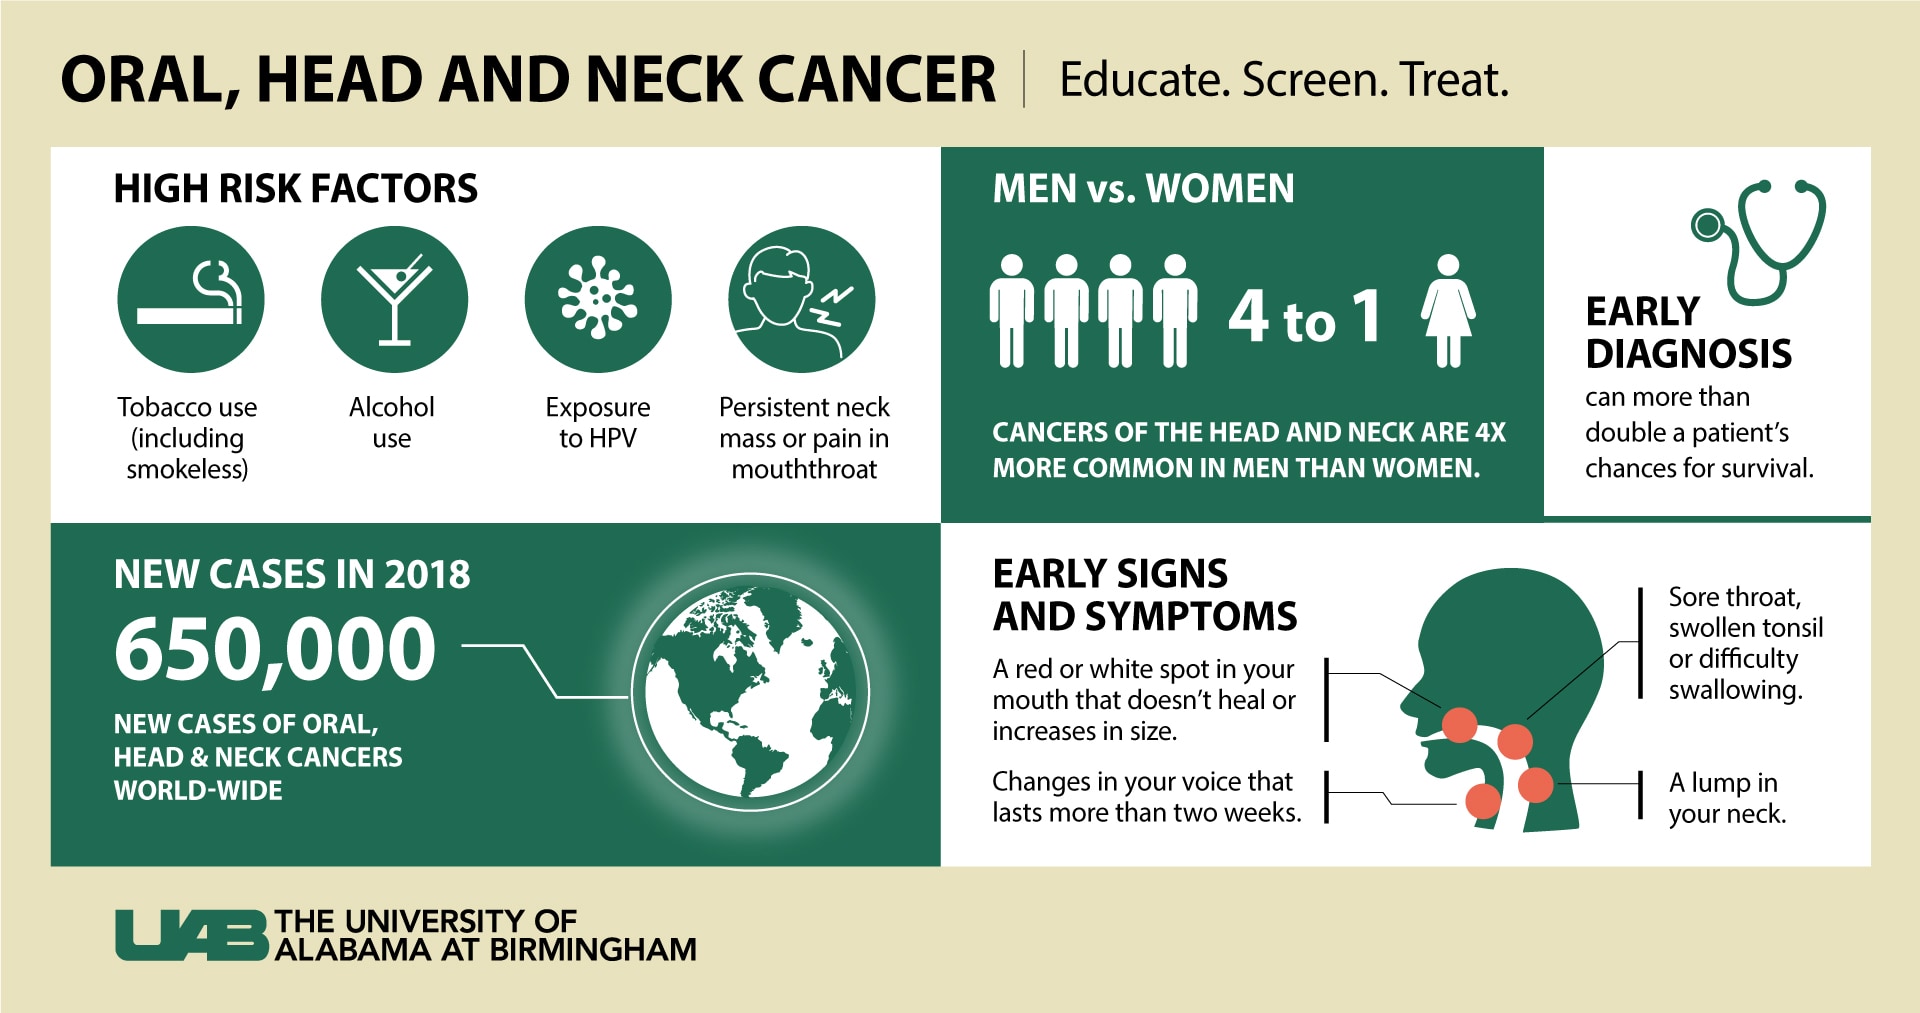 Free Oral Head And Neck Cancer Screening Otolaryngology